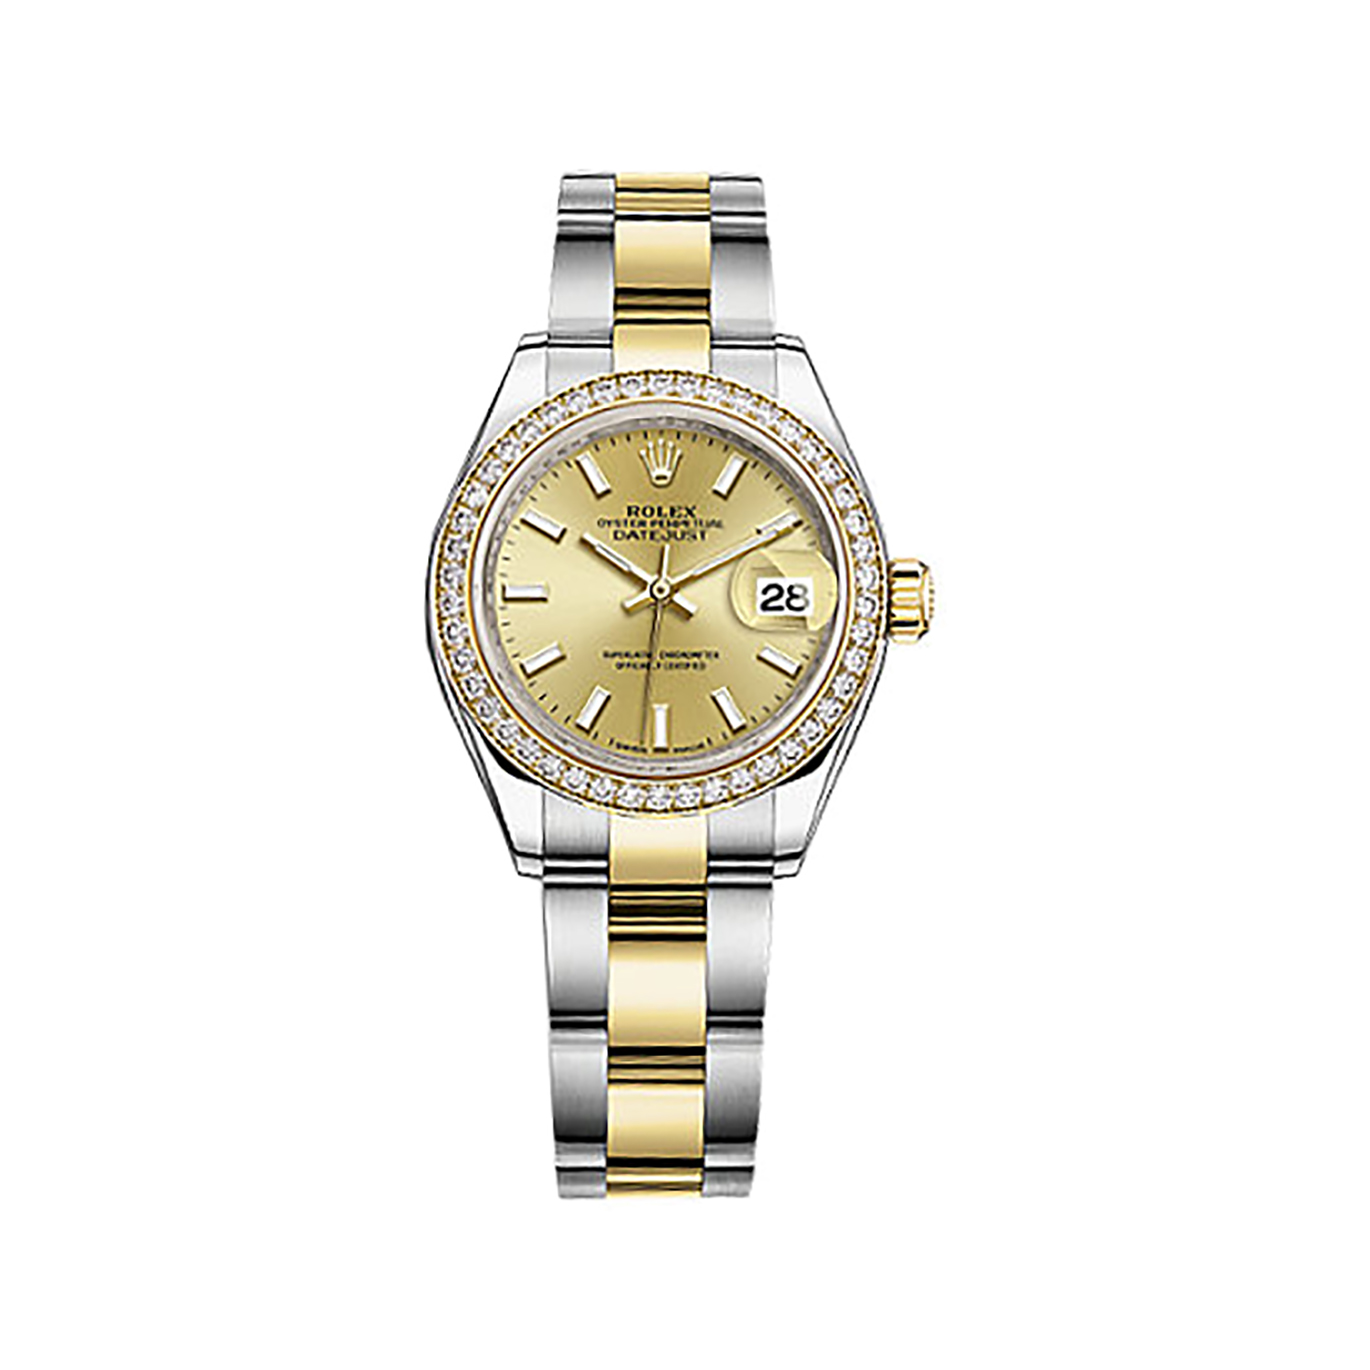 Lady-Datejust 28 279383RBR Gold & Stainless Steel & Diamonds Watch (Champagne)